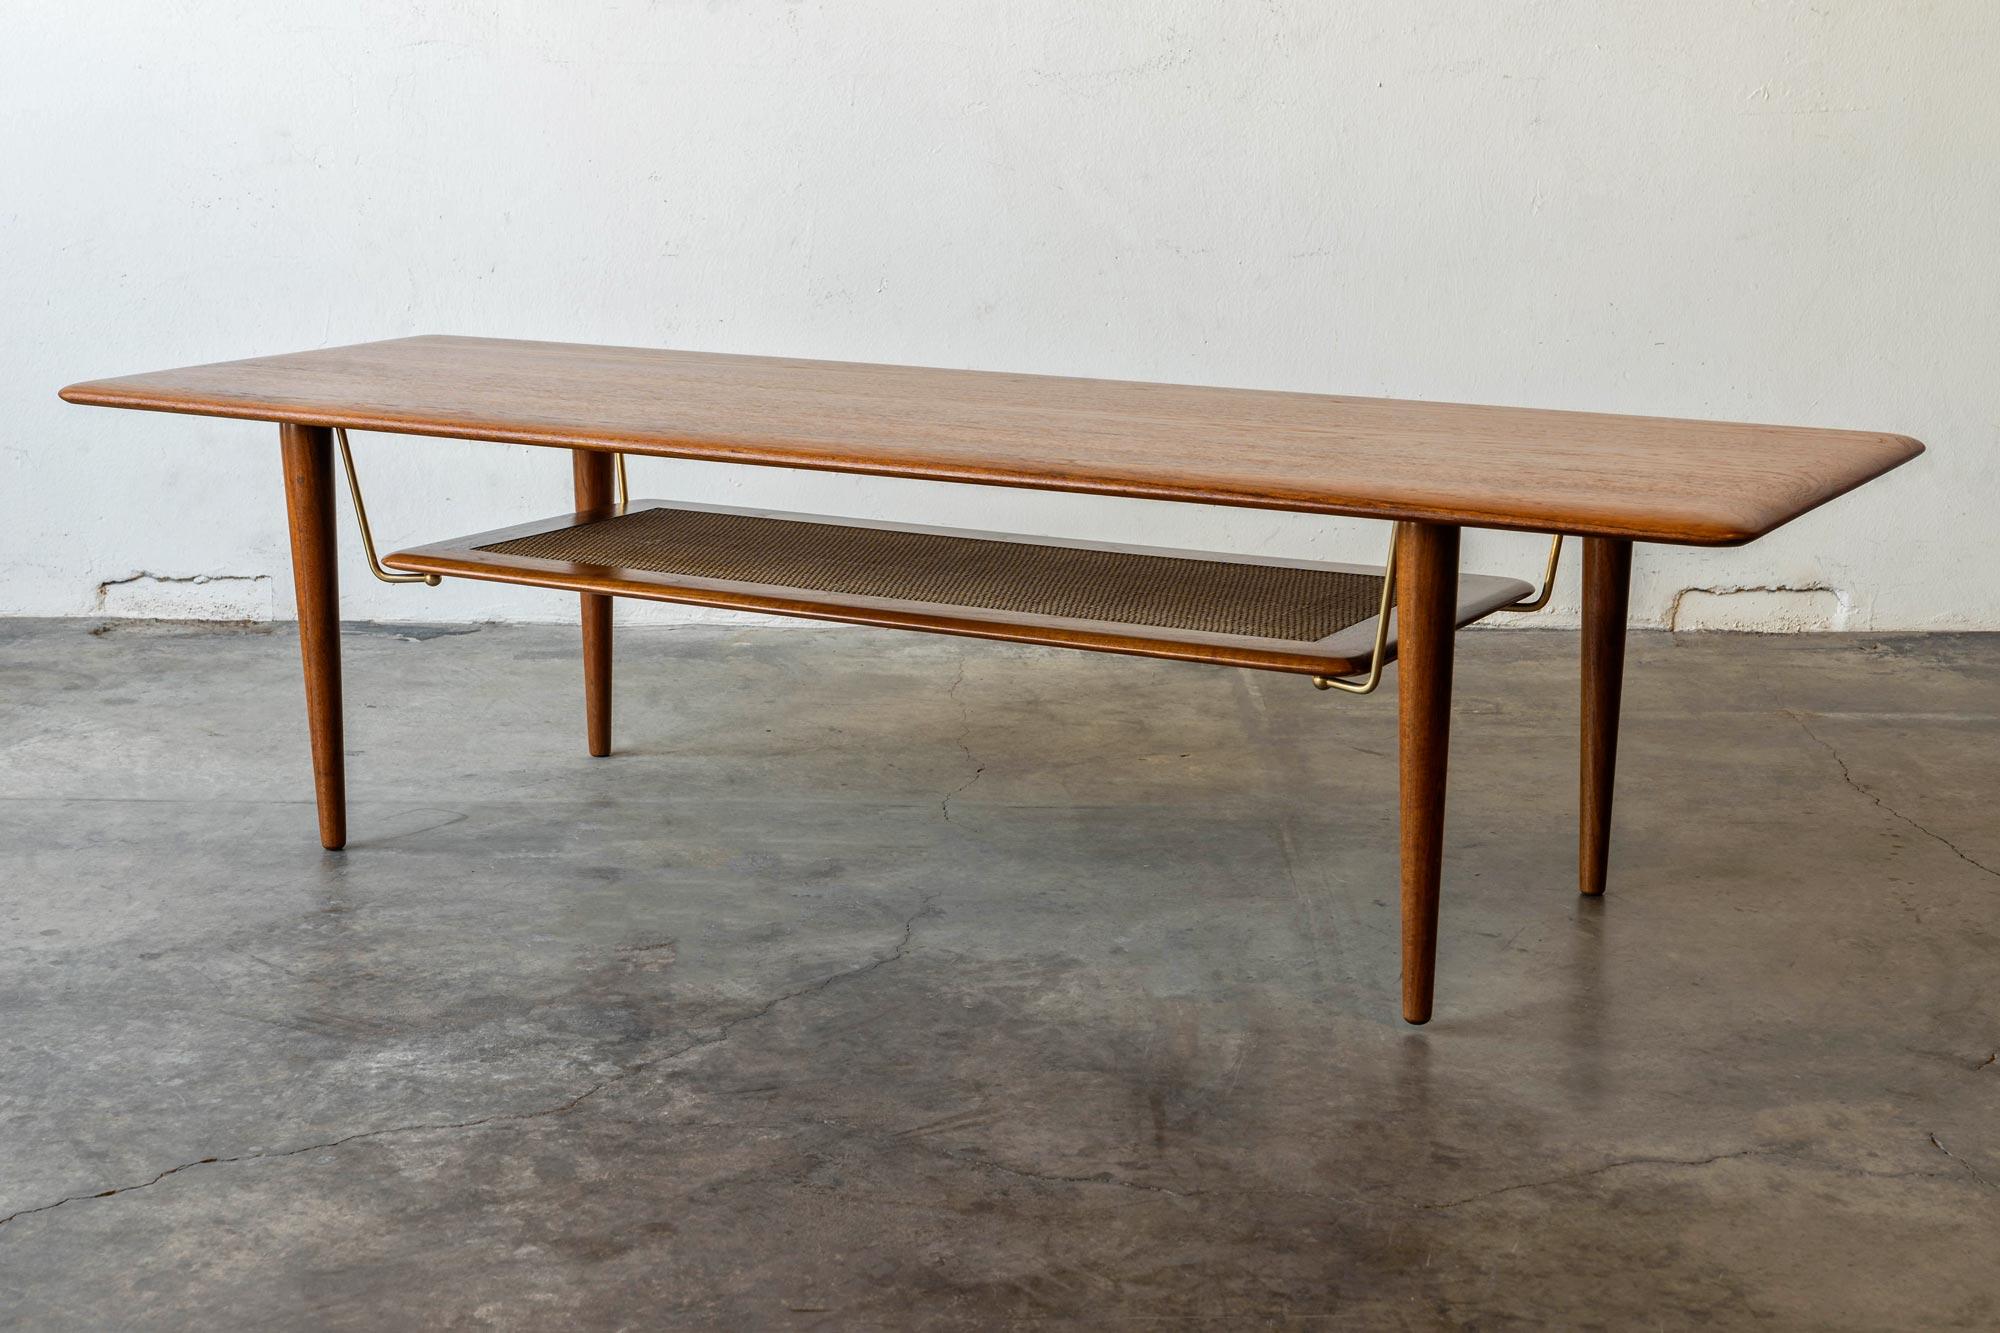 Coffee table set designed in 1956 by Peter Hvidt and Orla Mølgaard Nielsen for France and Daverkosen. The coffee table Model FD516 is composed of a solid teak top / legs with a lower cane rack / shelf suspended by polished brass brackets. The solid